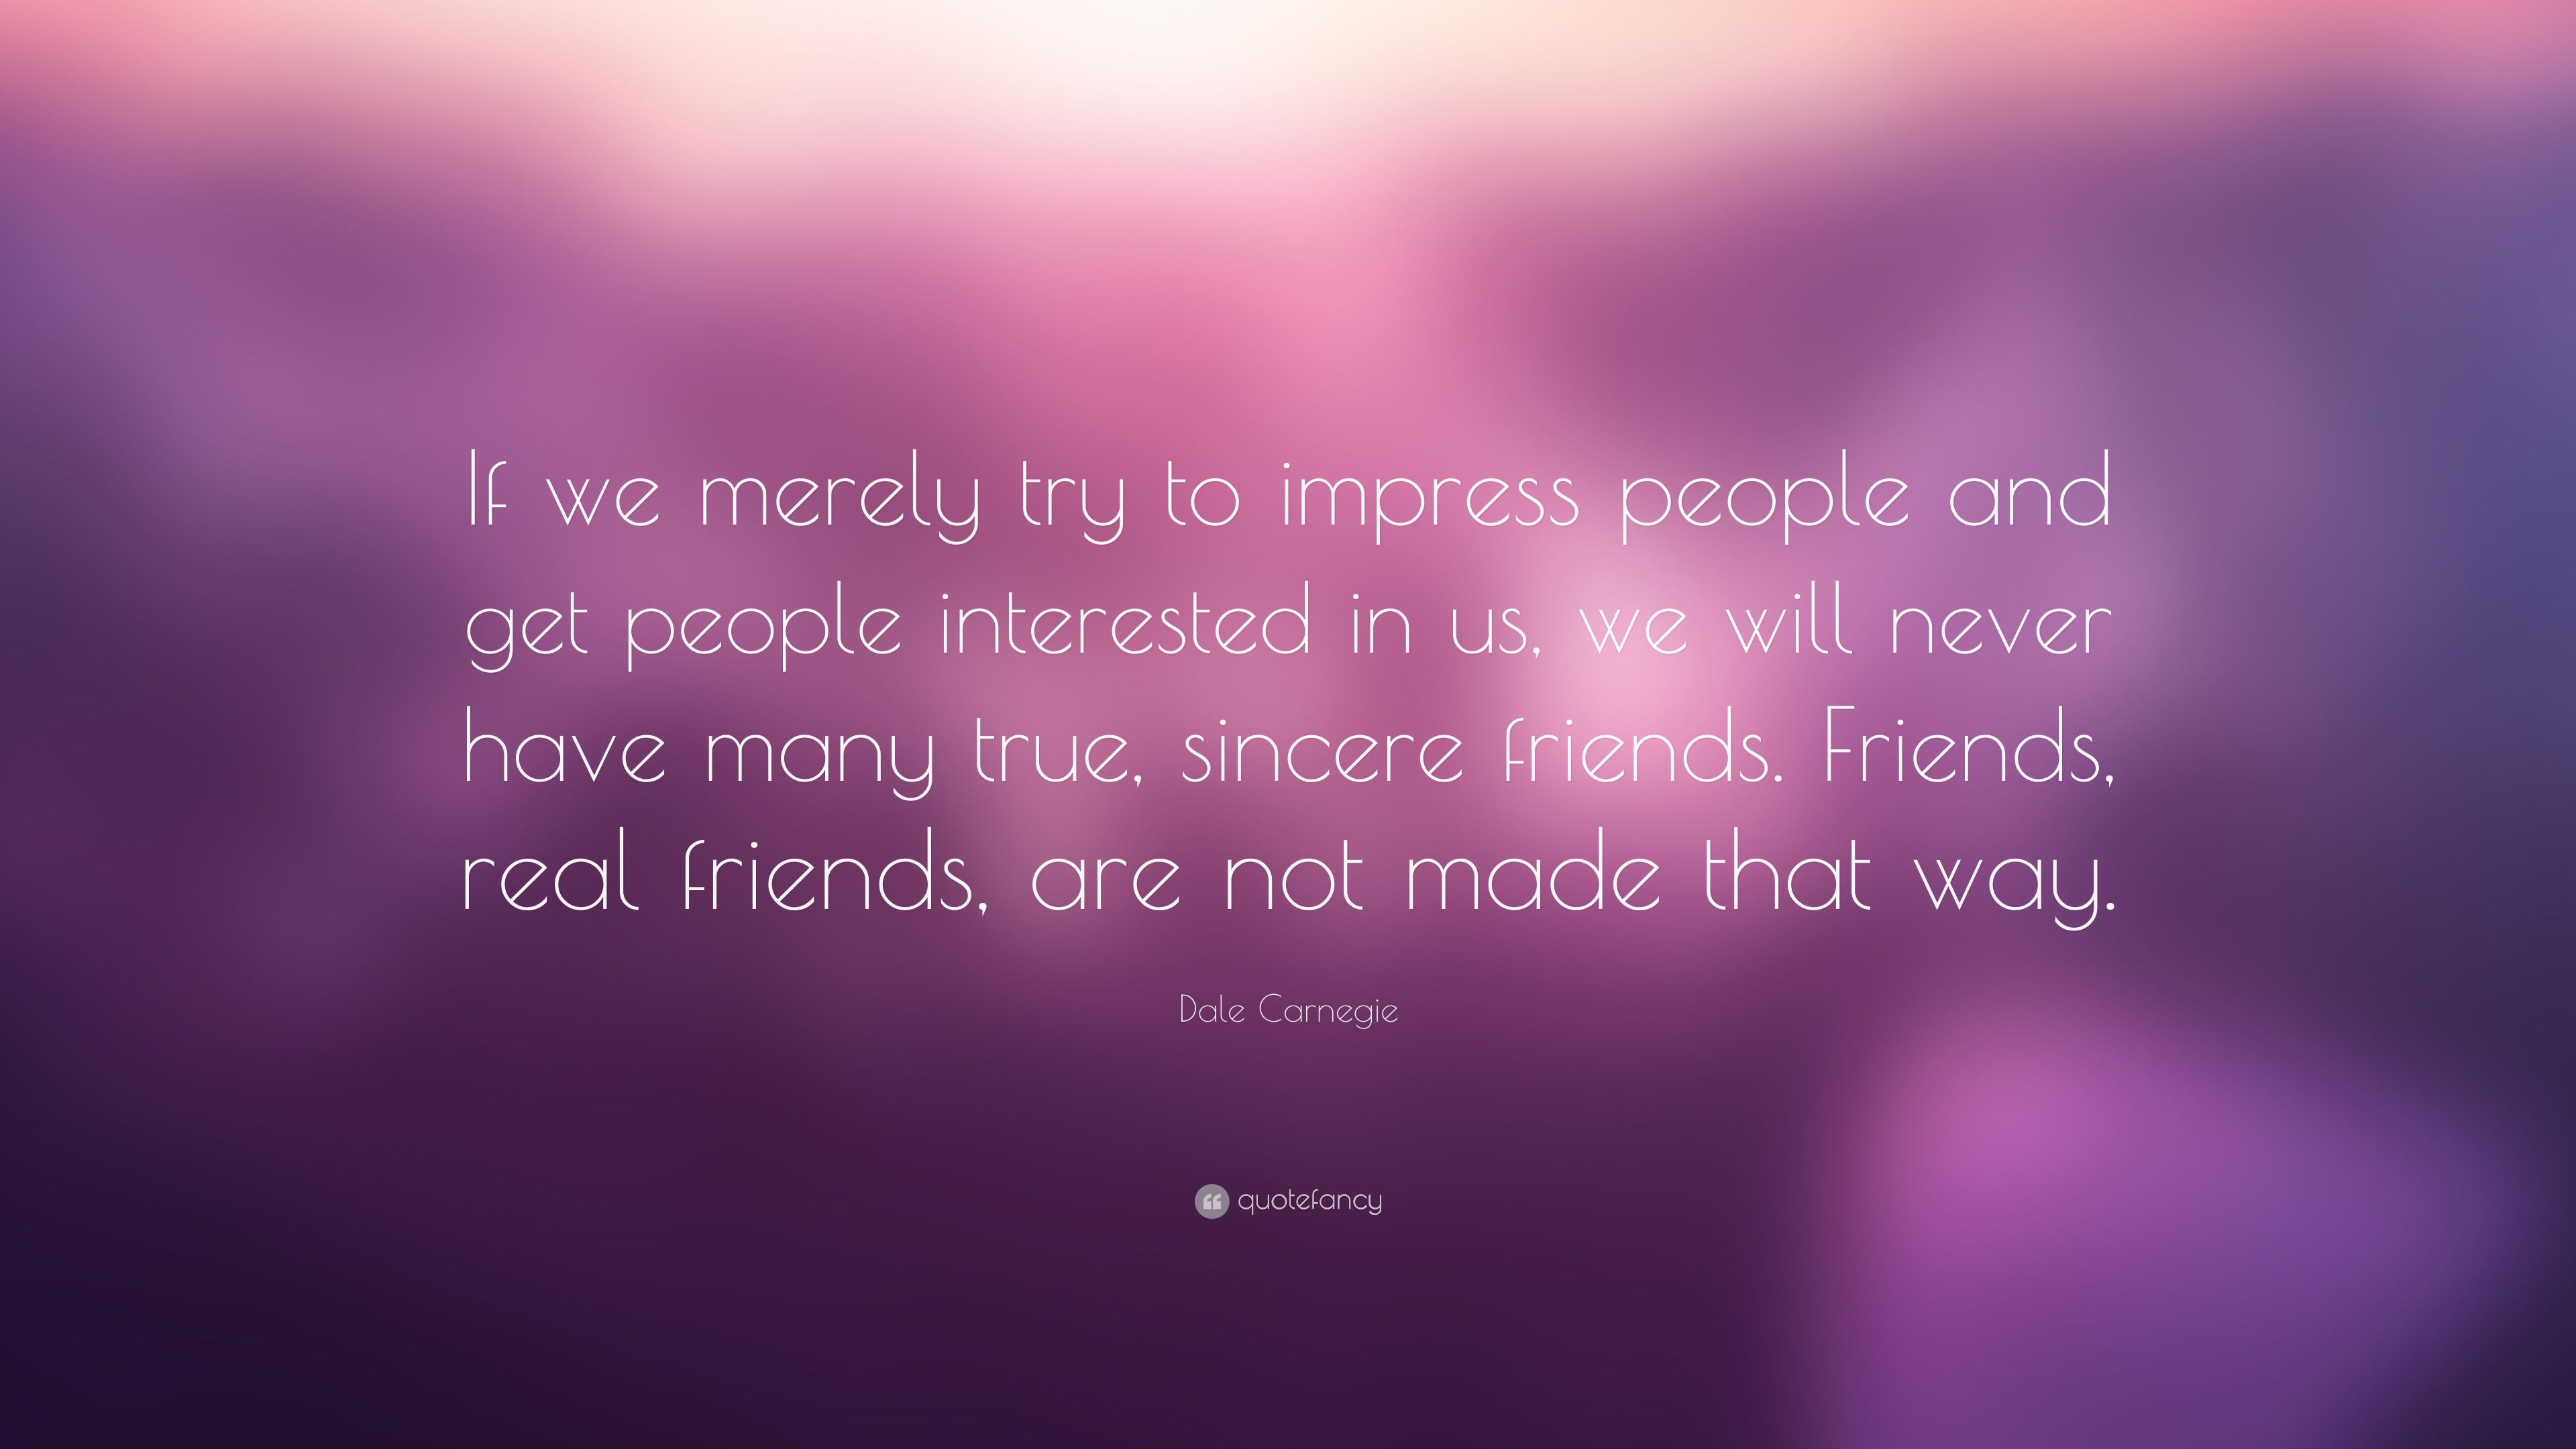 Dale Carnegie Quote: “If we merely try to impress people and get people ...